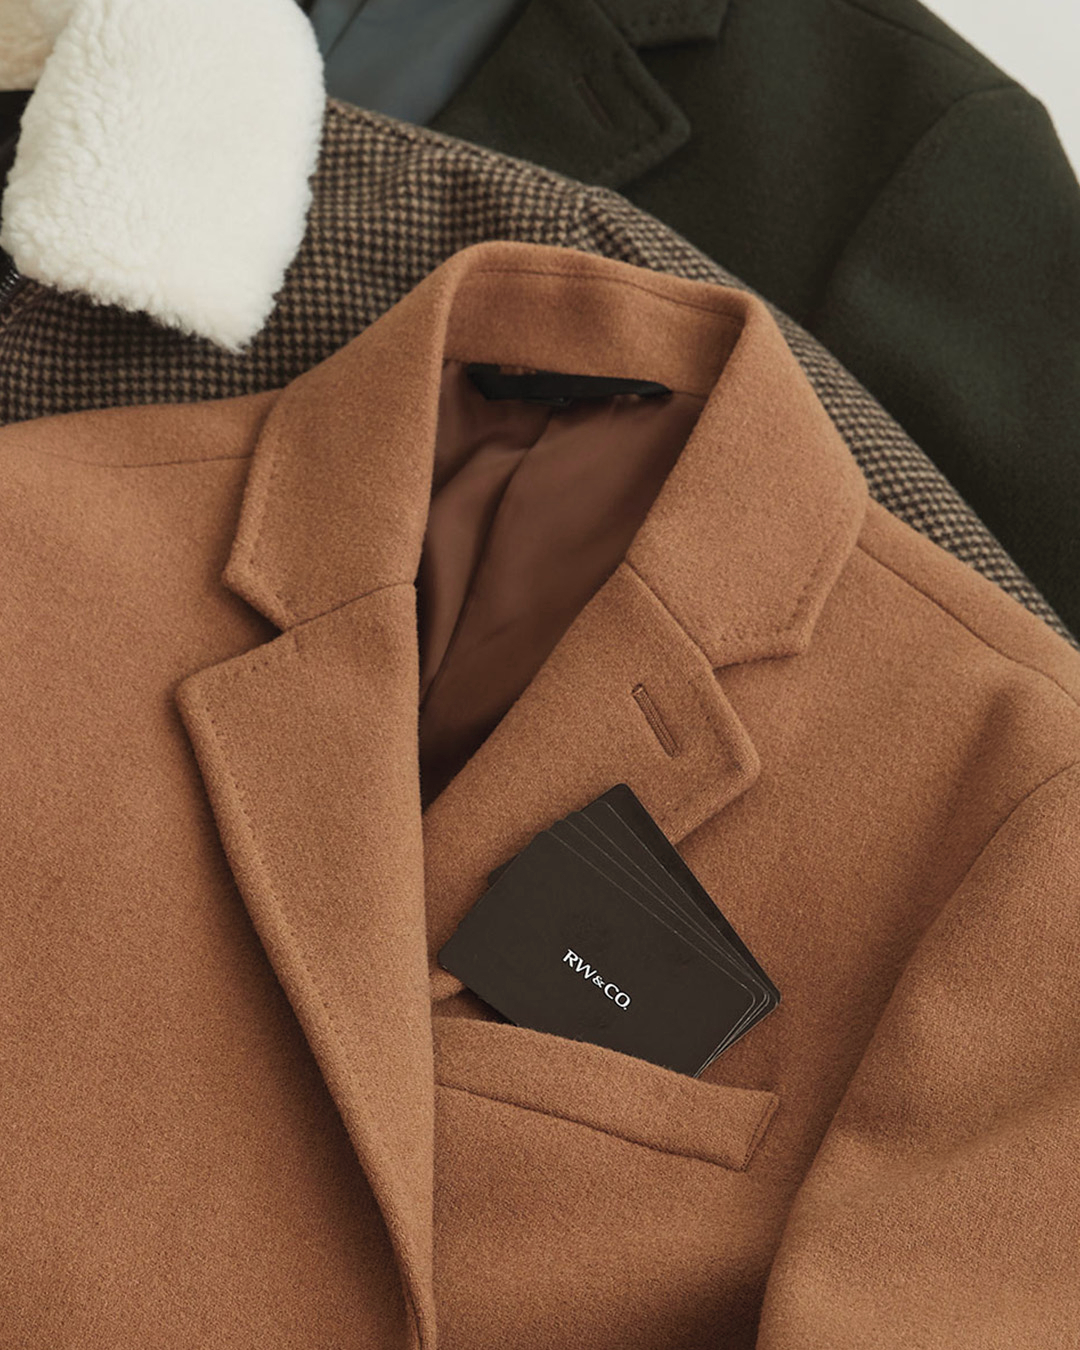 An RW&Co. camel coloured coat is featured laying on top of other clothing.